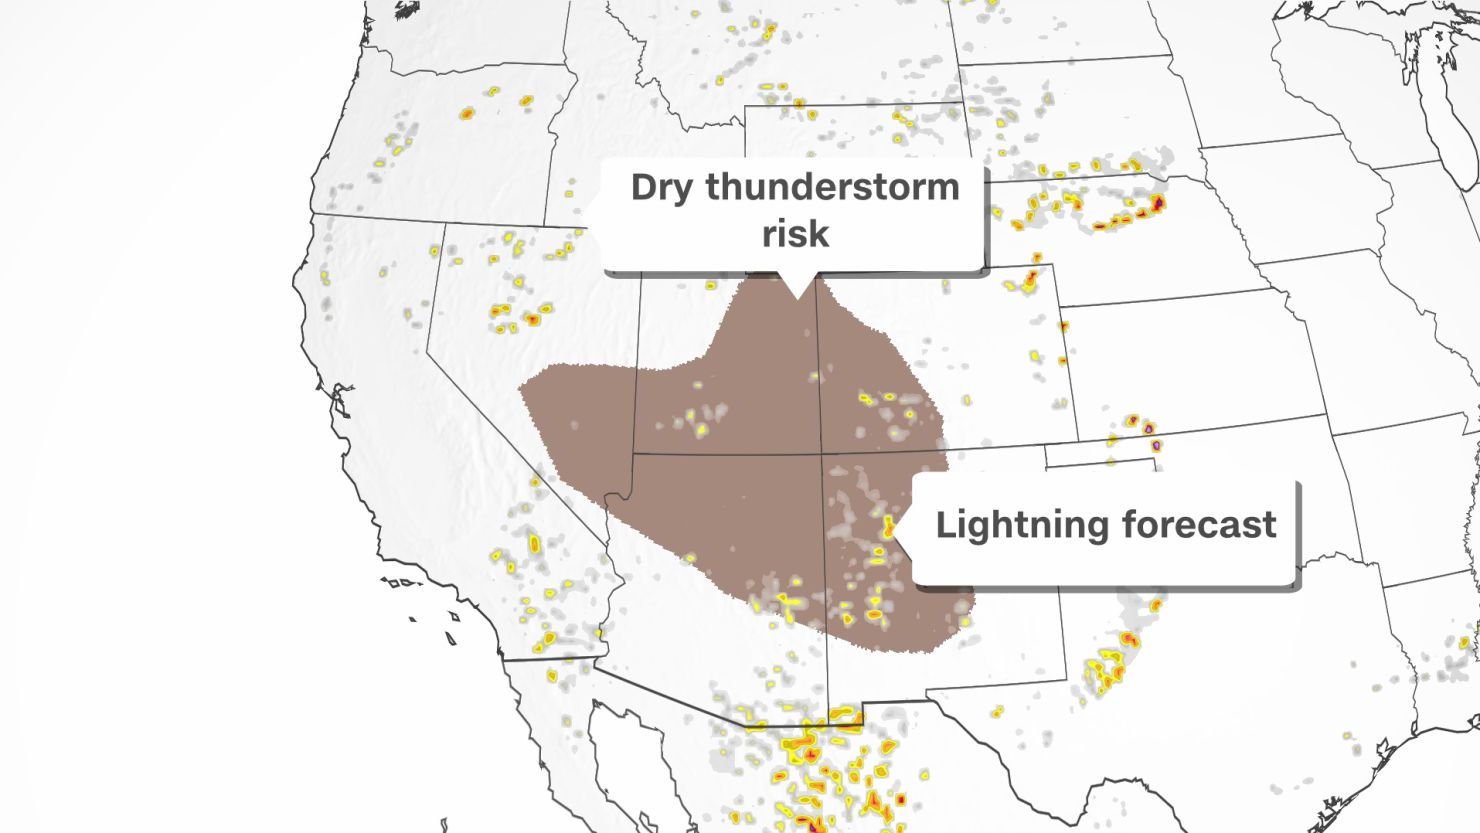 Dry thunderstorm's are likely Wednesday within the area shaded in brown.